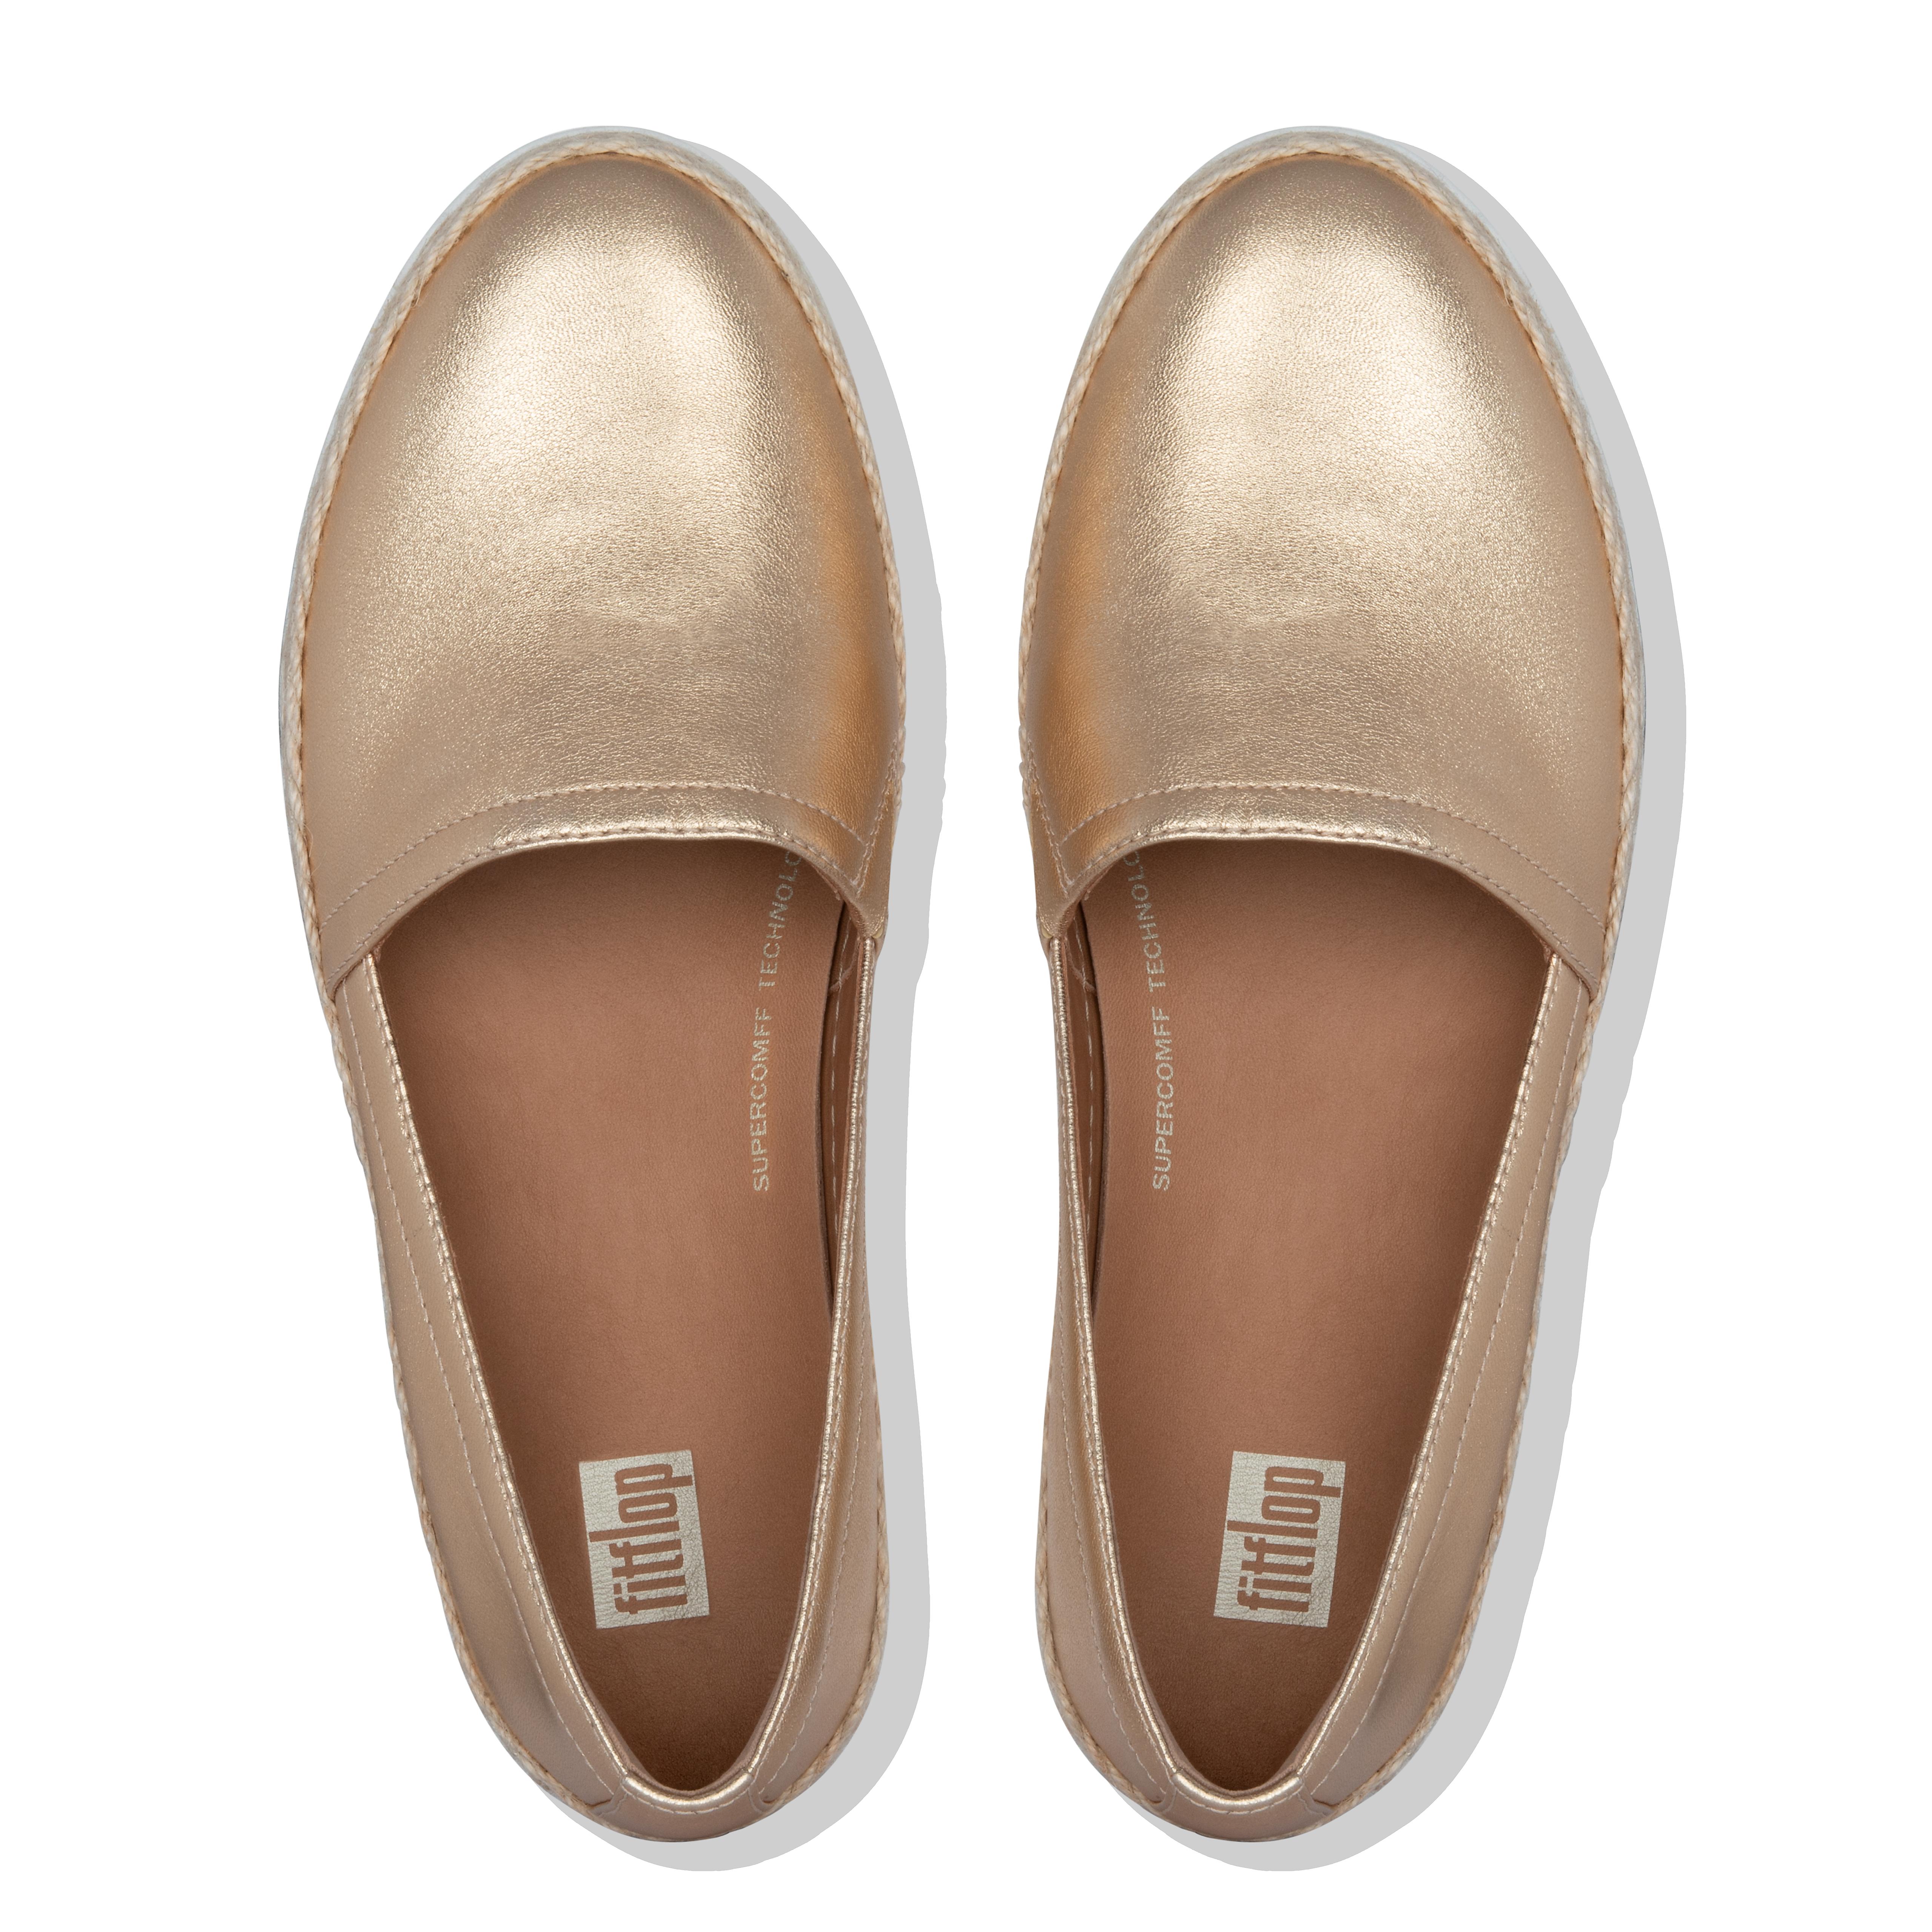 casa loafer fitflop